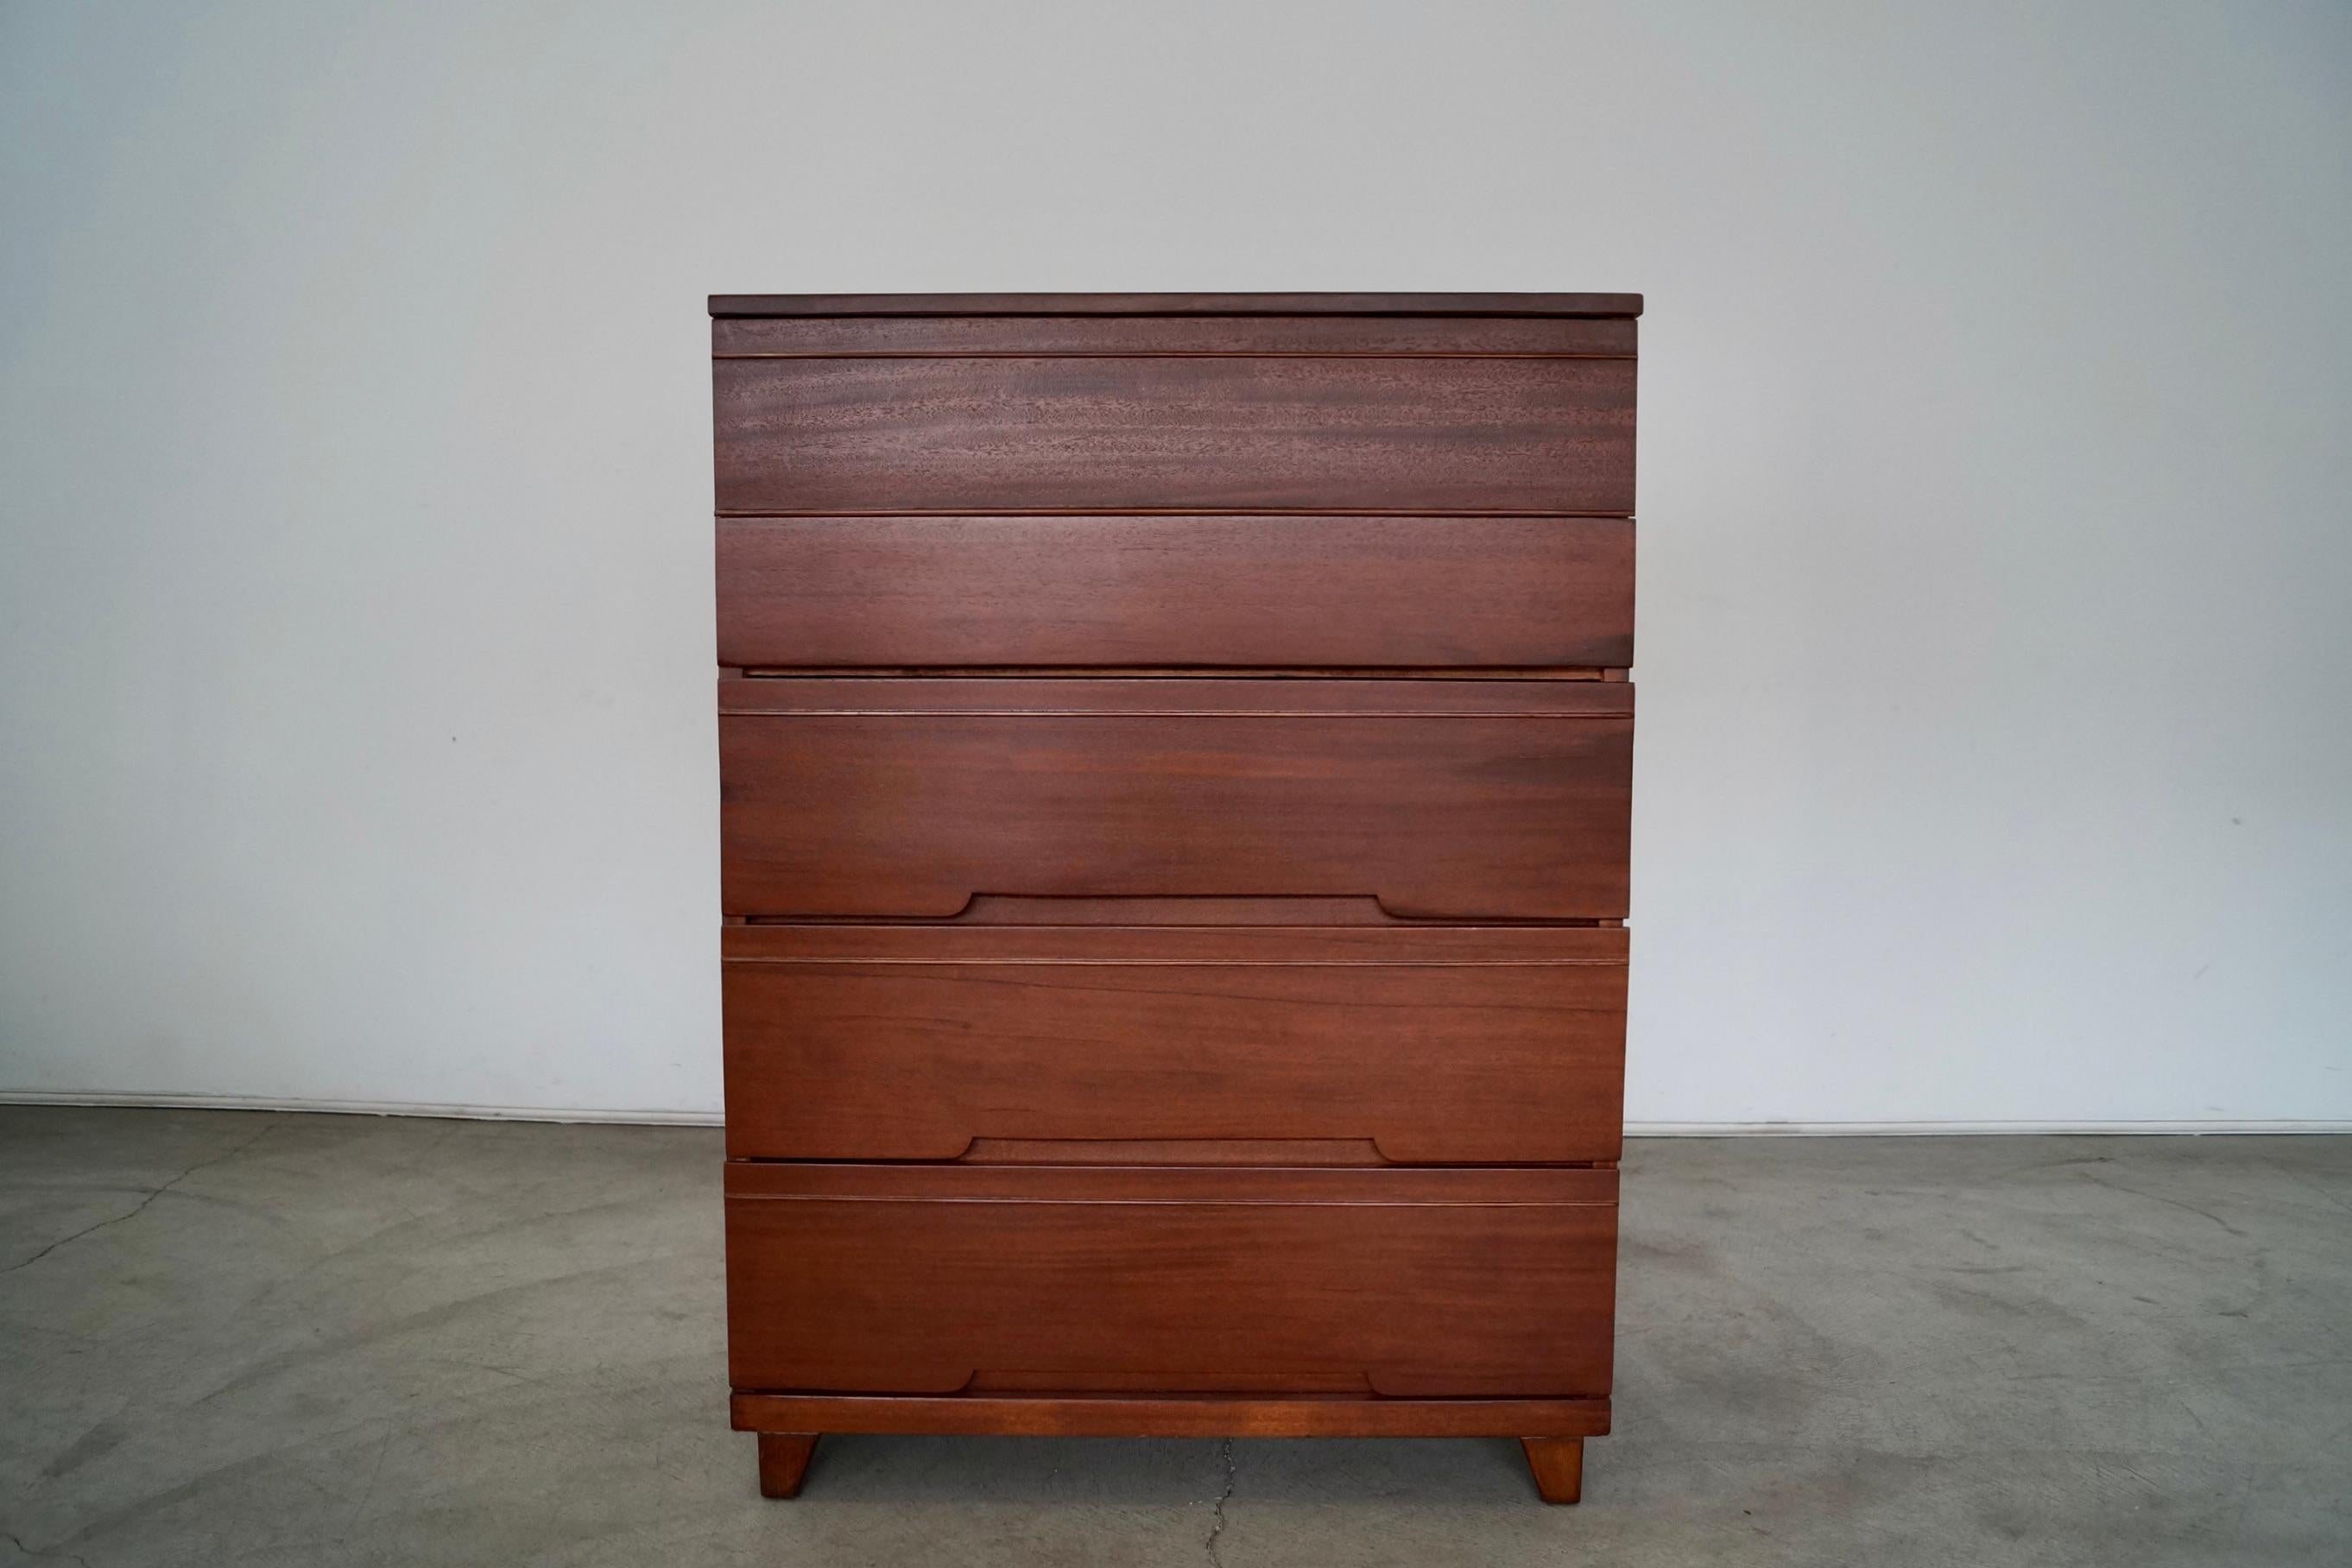 1940's Art Deco Highboy Dresser In Good Condition For Sale In Burbank, CA